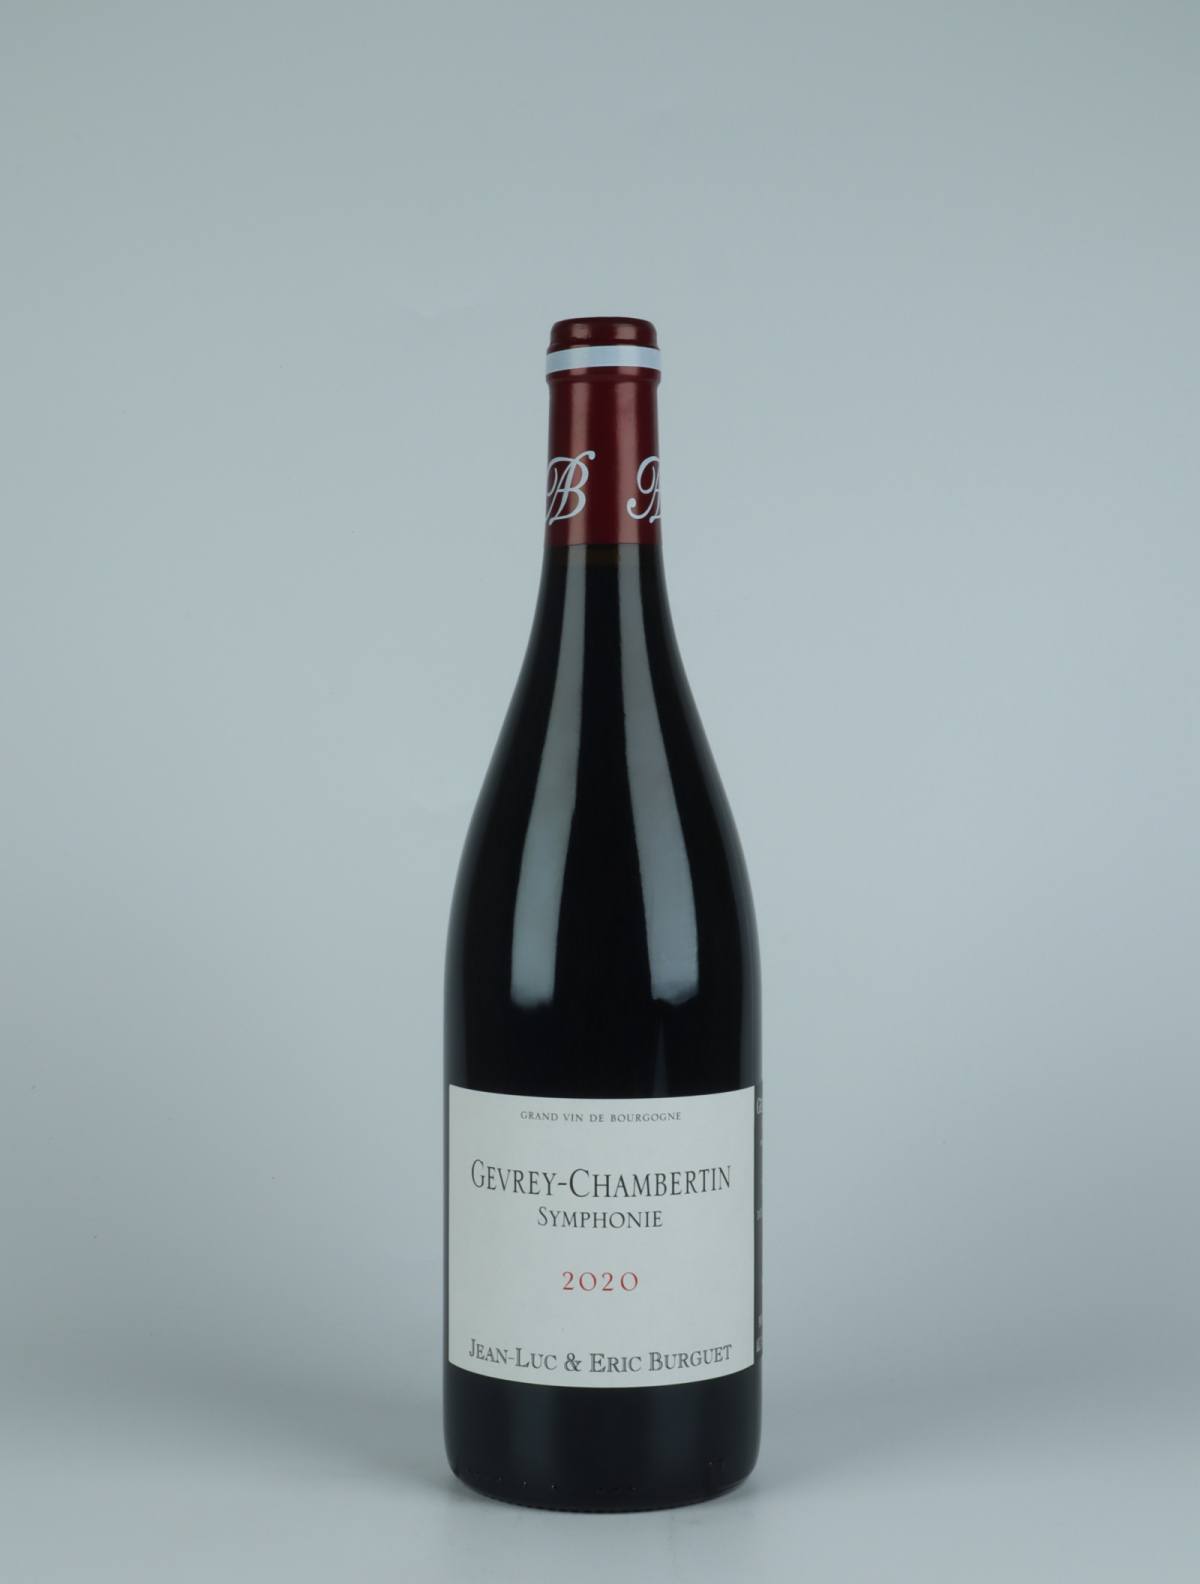 A bottle 2020 Gevrey-Chambertin - Symphonie Red wine from Jean-Luc & Eric Burguet, Burgundy in France